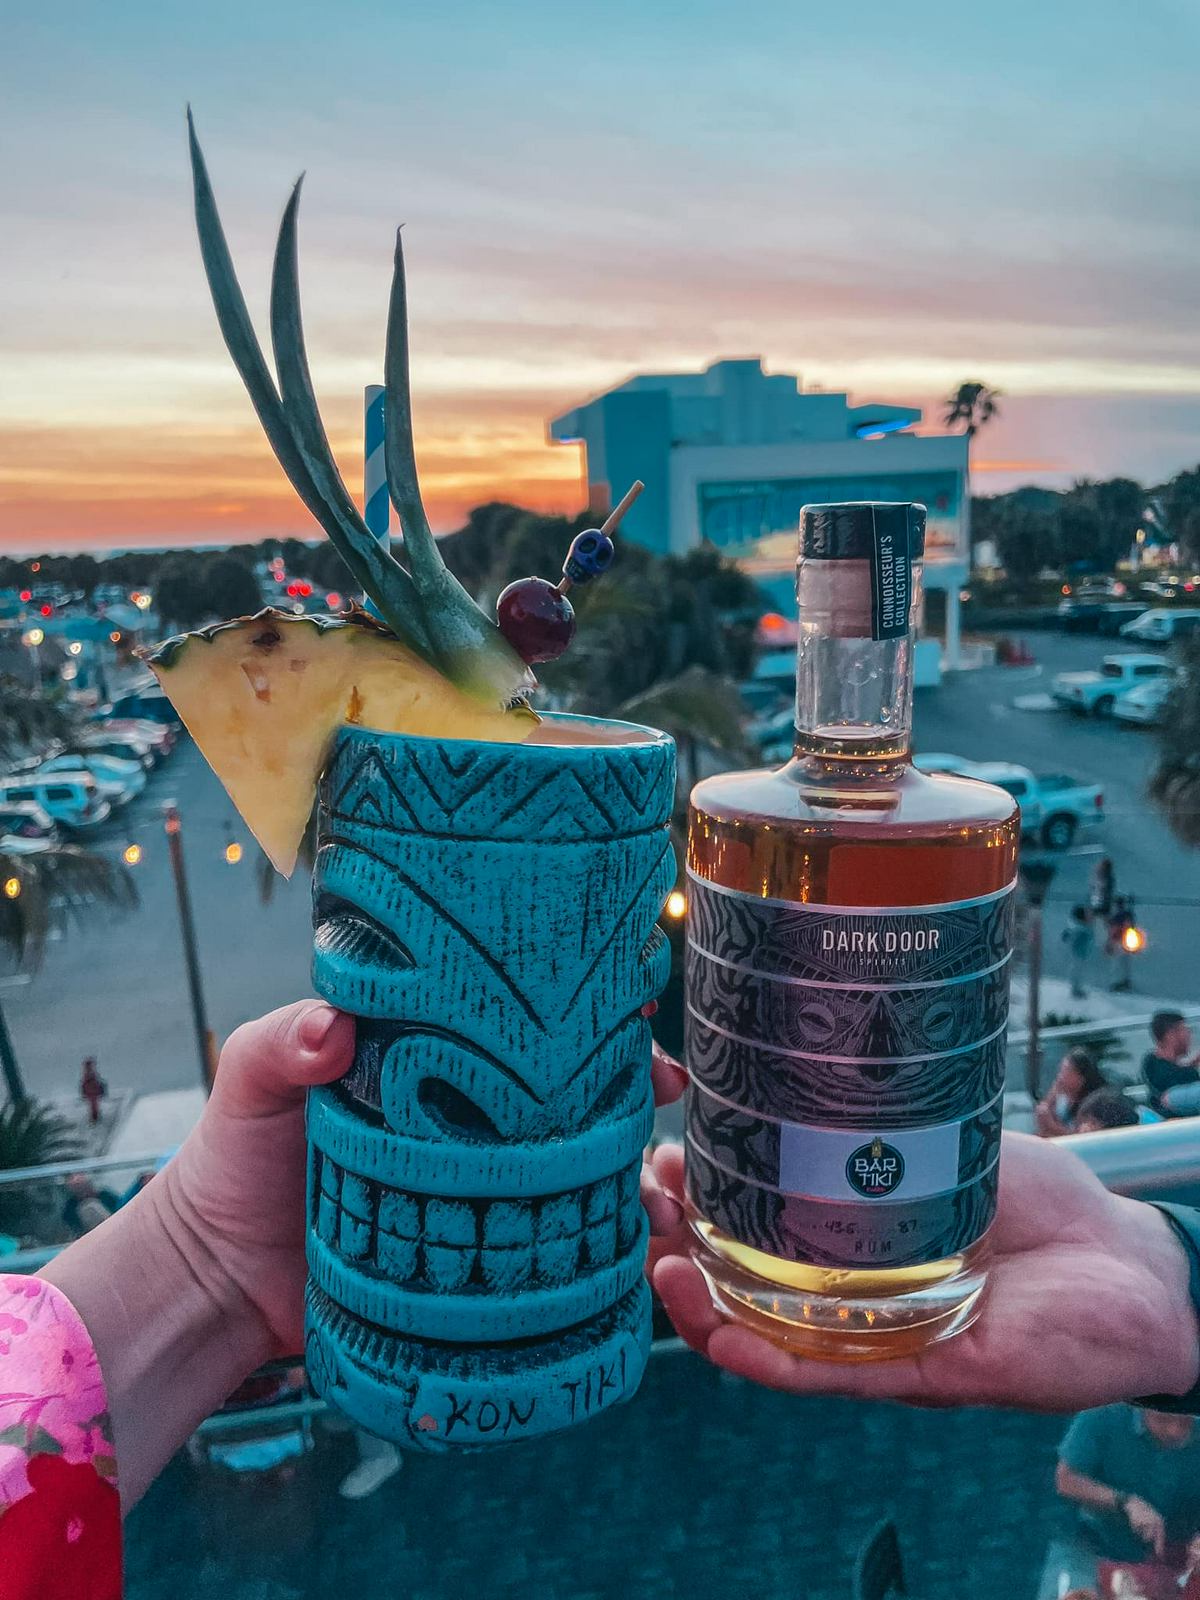 Dark Door Spirits rum and tiki drink from Bar Tiki with sunset on Clearwater Beach in the background